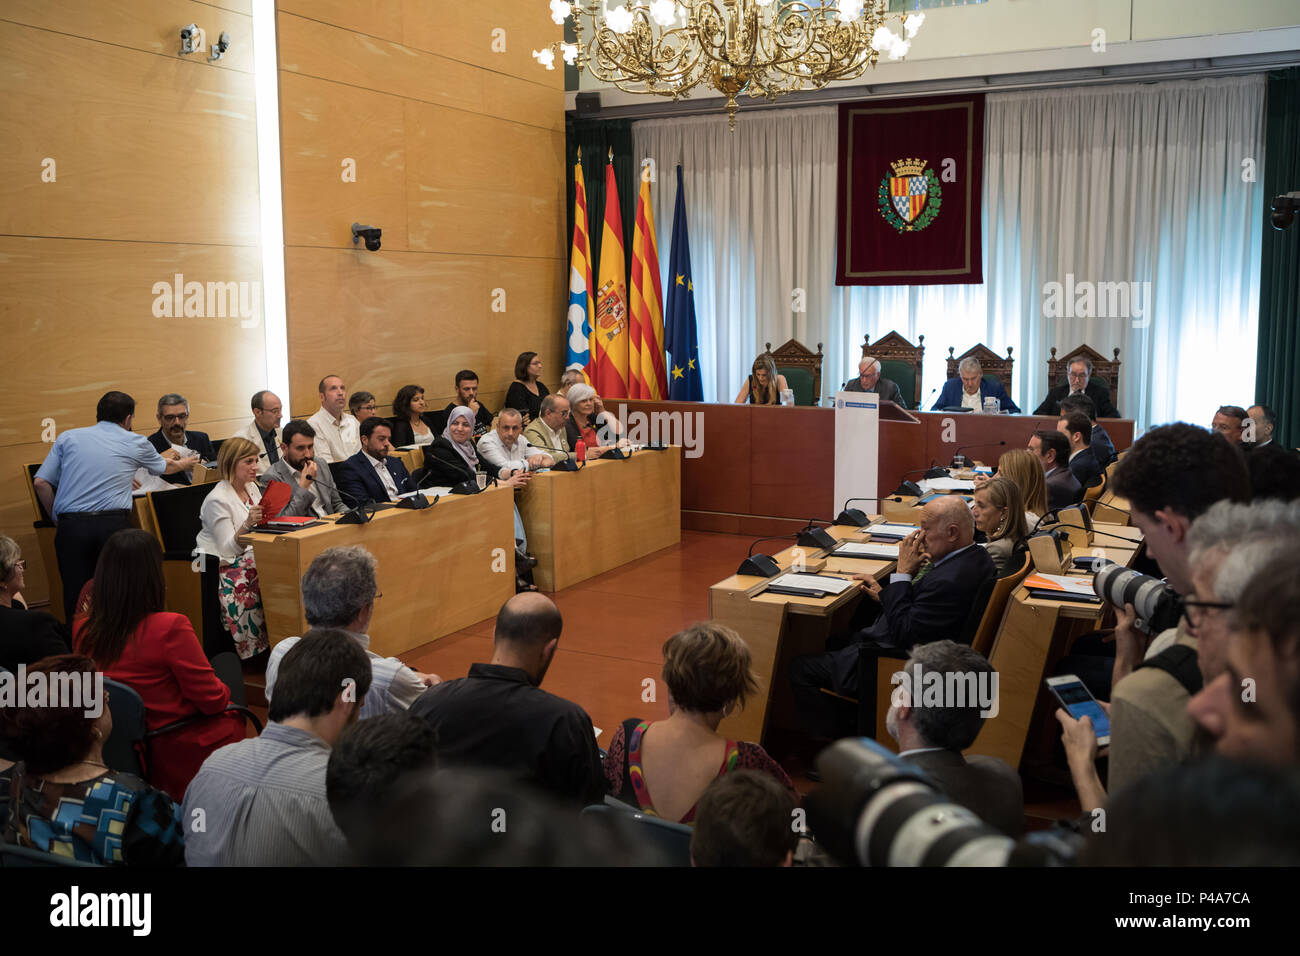 Open view of the hall while debating. The new Badalona Mayor Alex Pastor changed with support of PP (People’s Party) PSC (Socialists' Party of Catalonia) and C's (Ciudadanos or Citizen in english) that voted ‘YES’ for a no-confidence motion of current mayor Dolors Sabater. Stock Photo